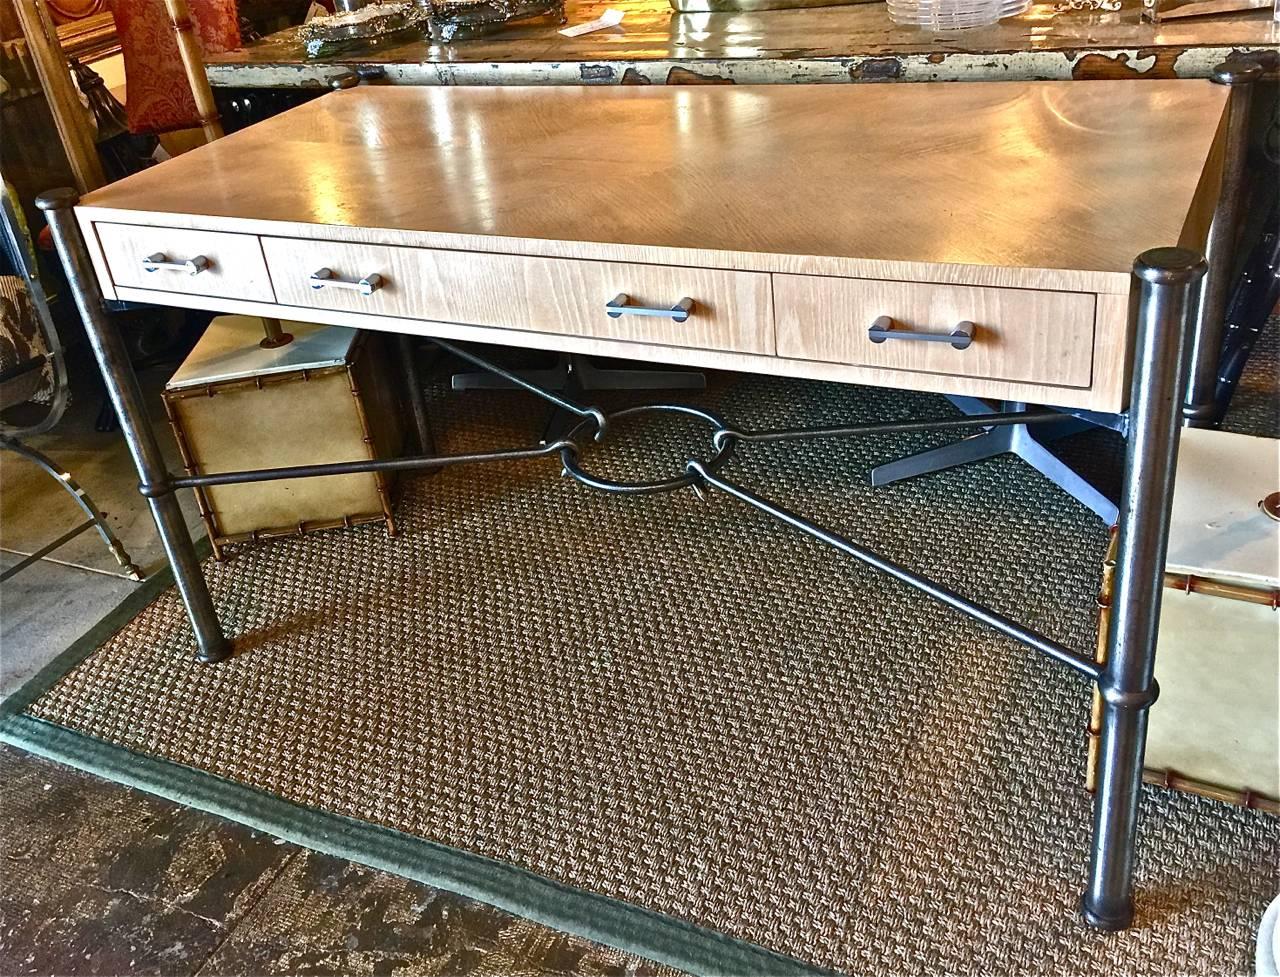 This is a stunning Jay Spectre for Century Writing Desk that dates to circa 1970-1980. The desk features a three drawer cerused oak writing surface supported by ringed steel columns with a forged iron centre stretcher. The desk is in very good